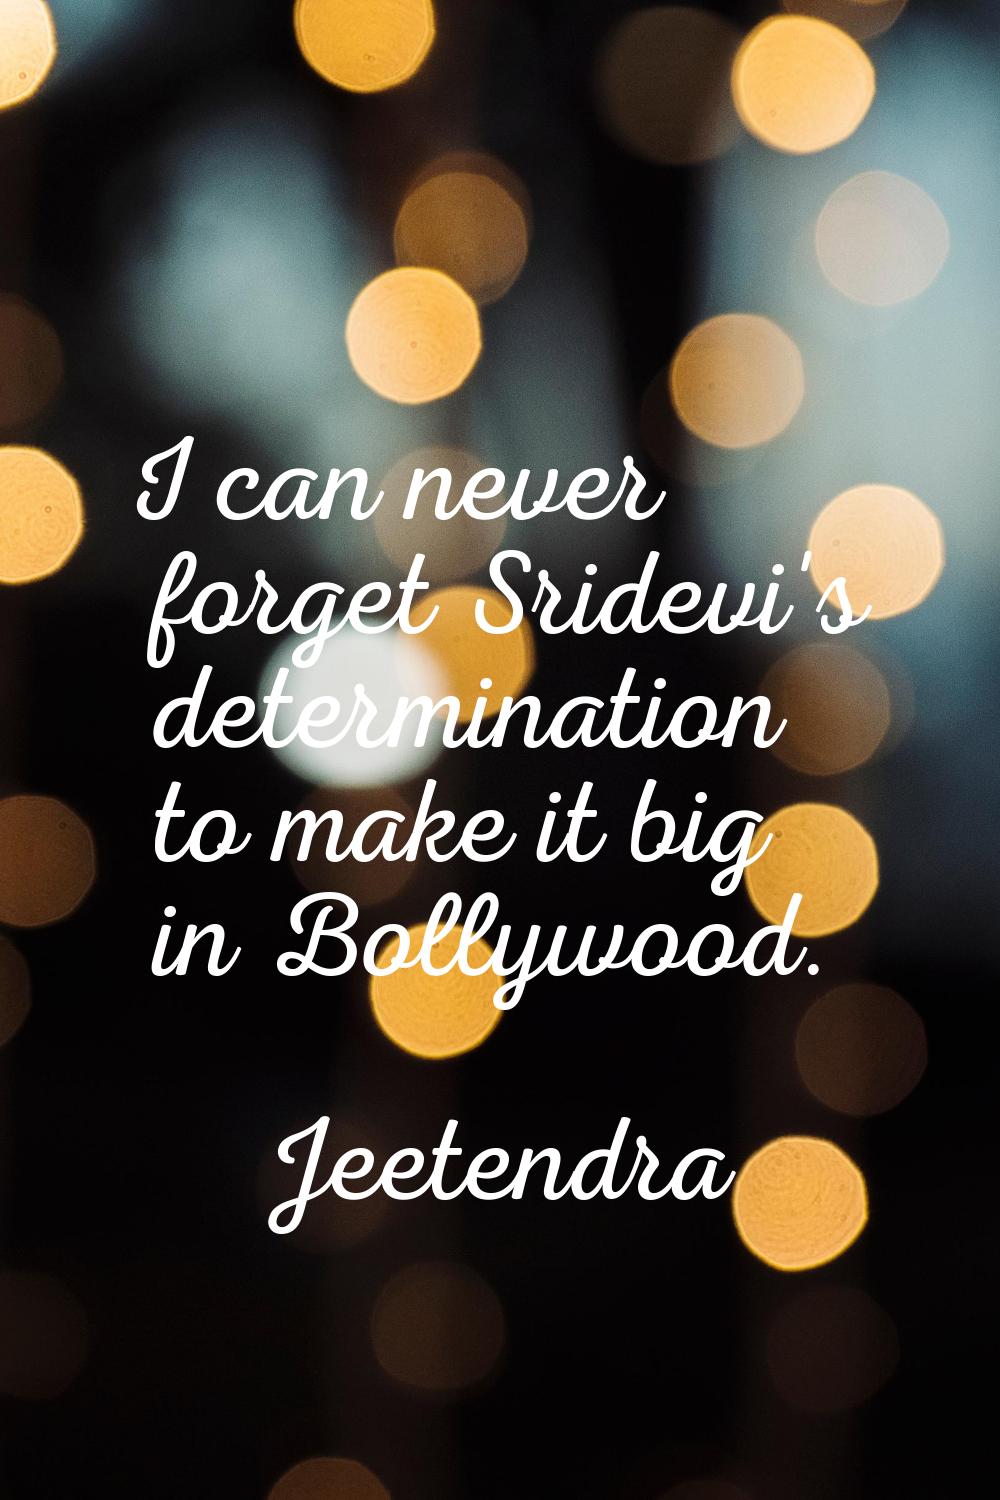 I can never forget Sridevi's determination to make it big in Bollywood.